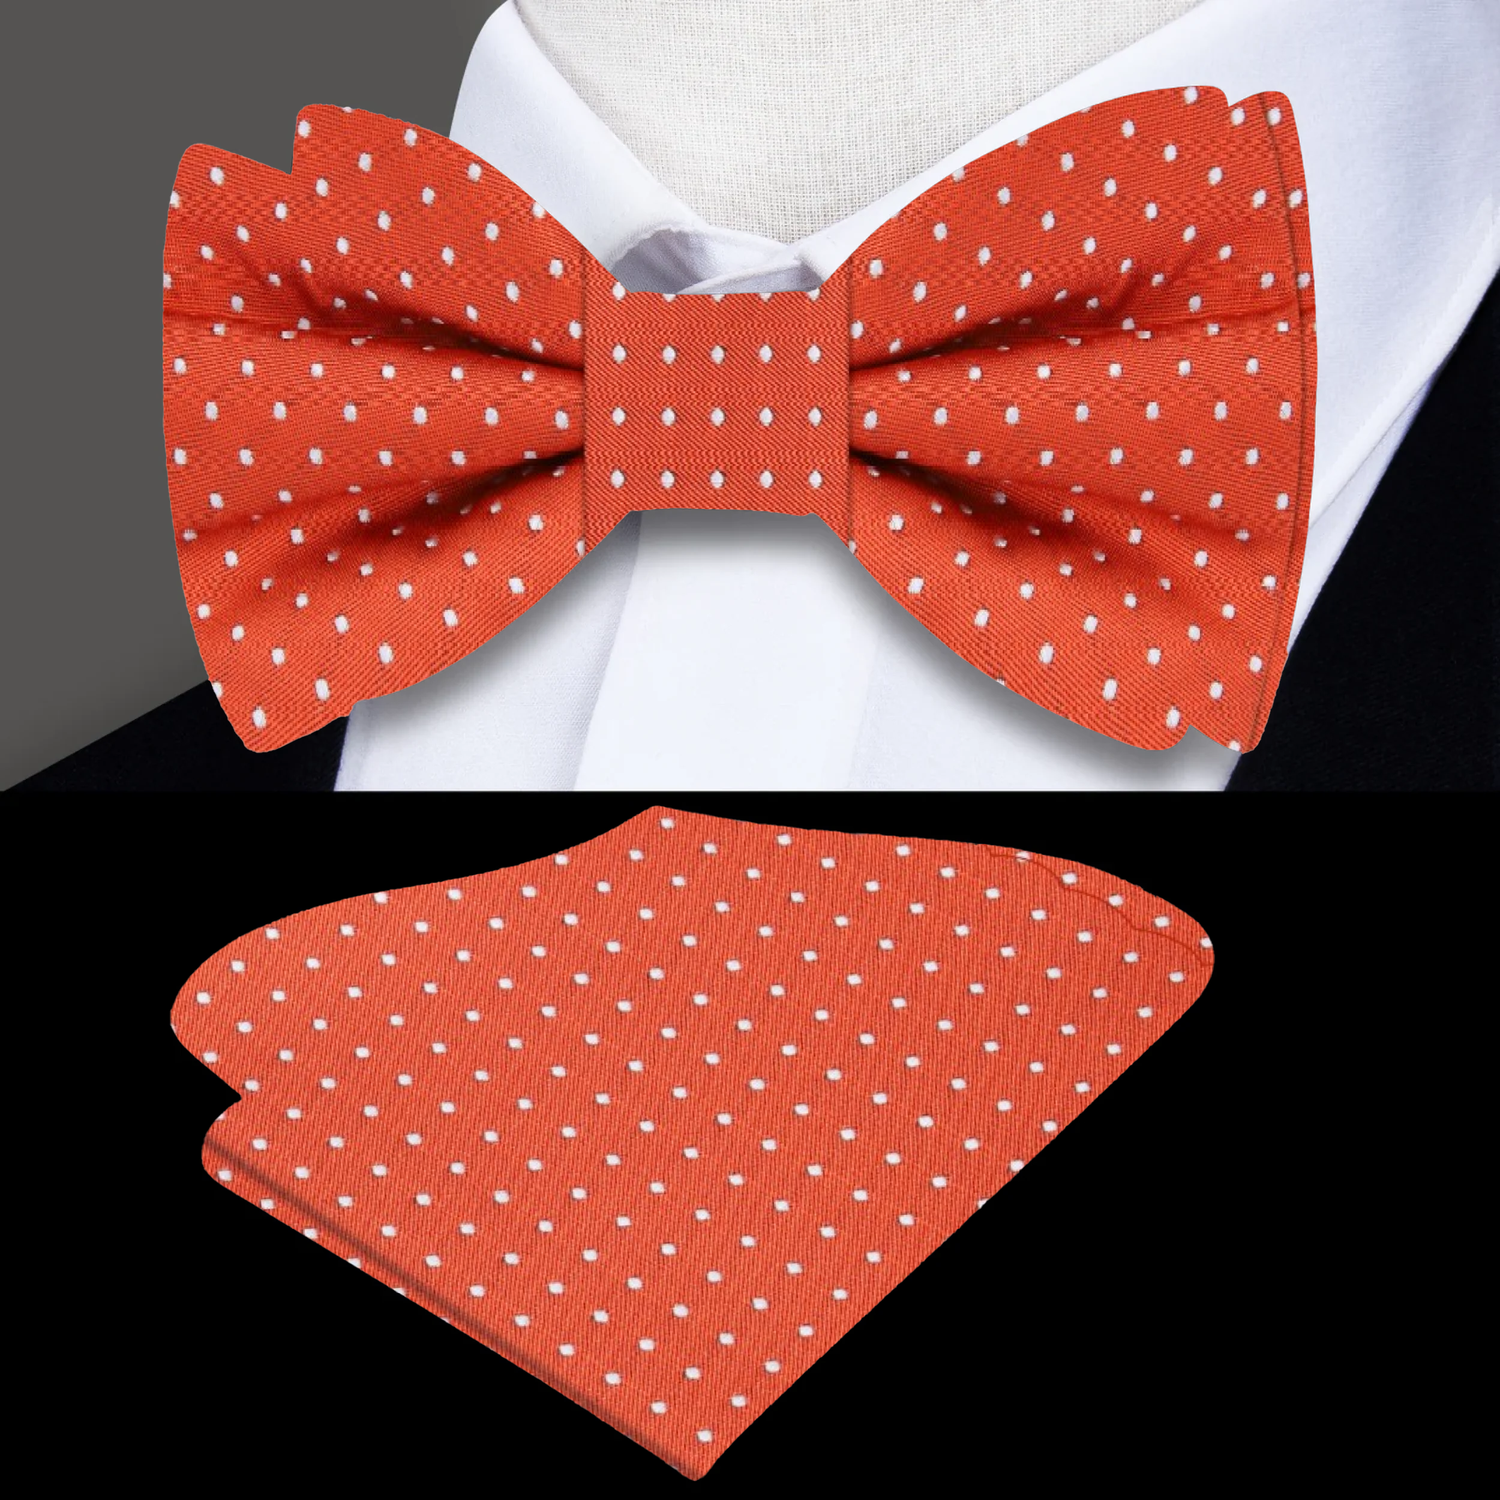 Reddish Orange with White Dots Bow Tie and Matching Square